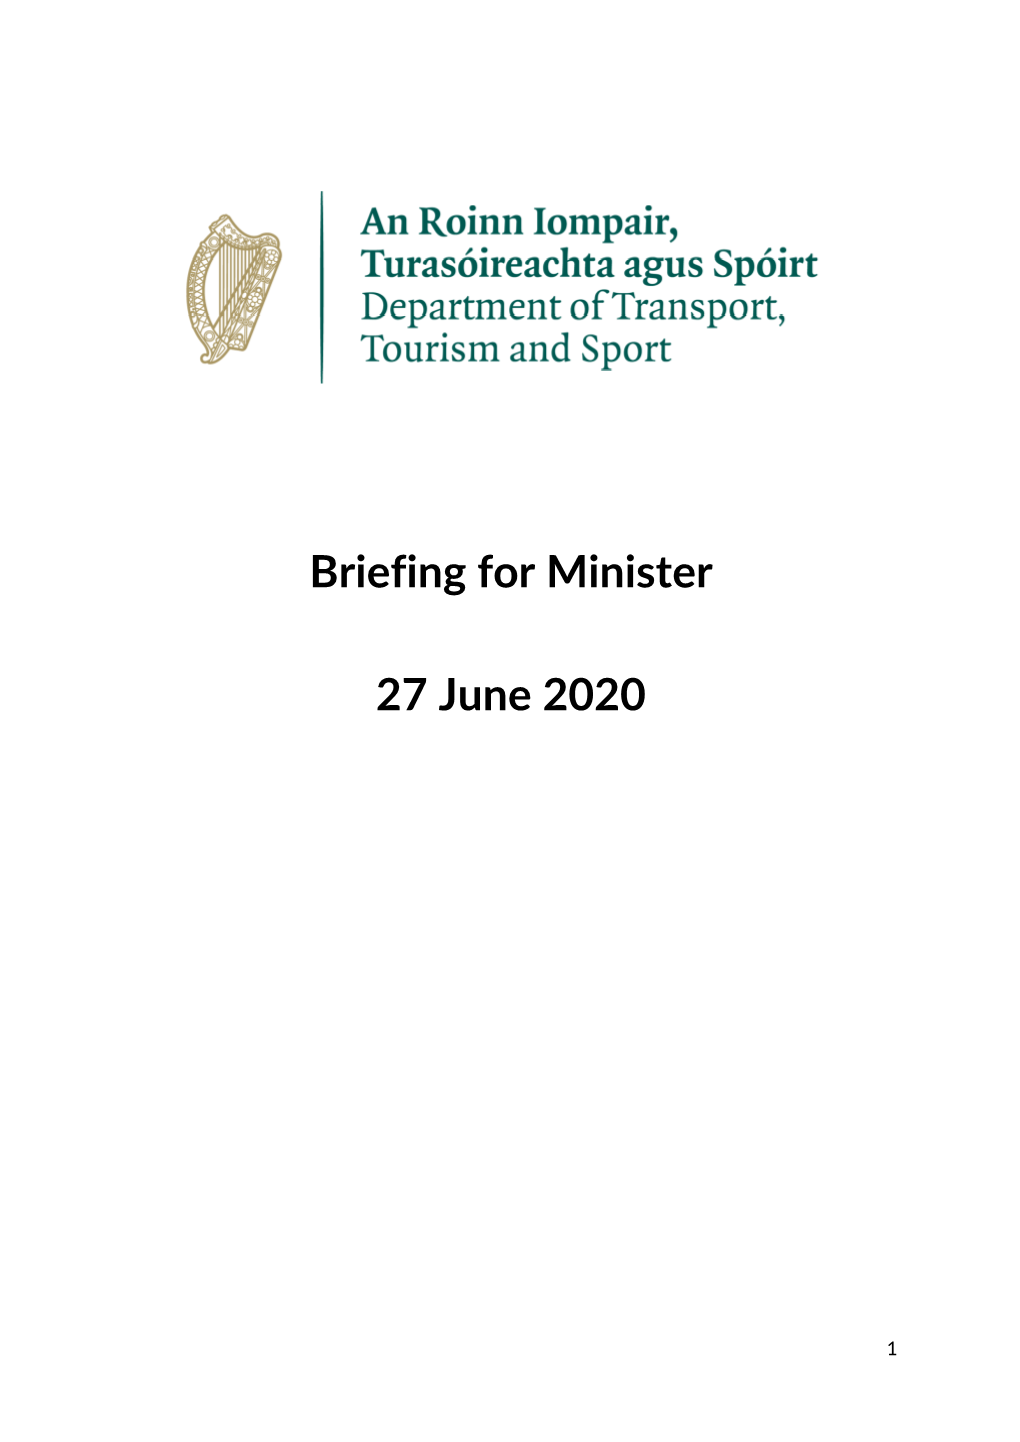 Briefing for Minister 27 June 2020